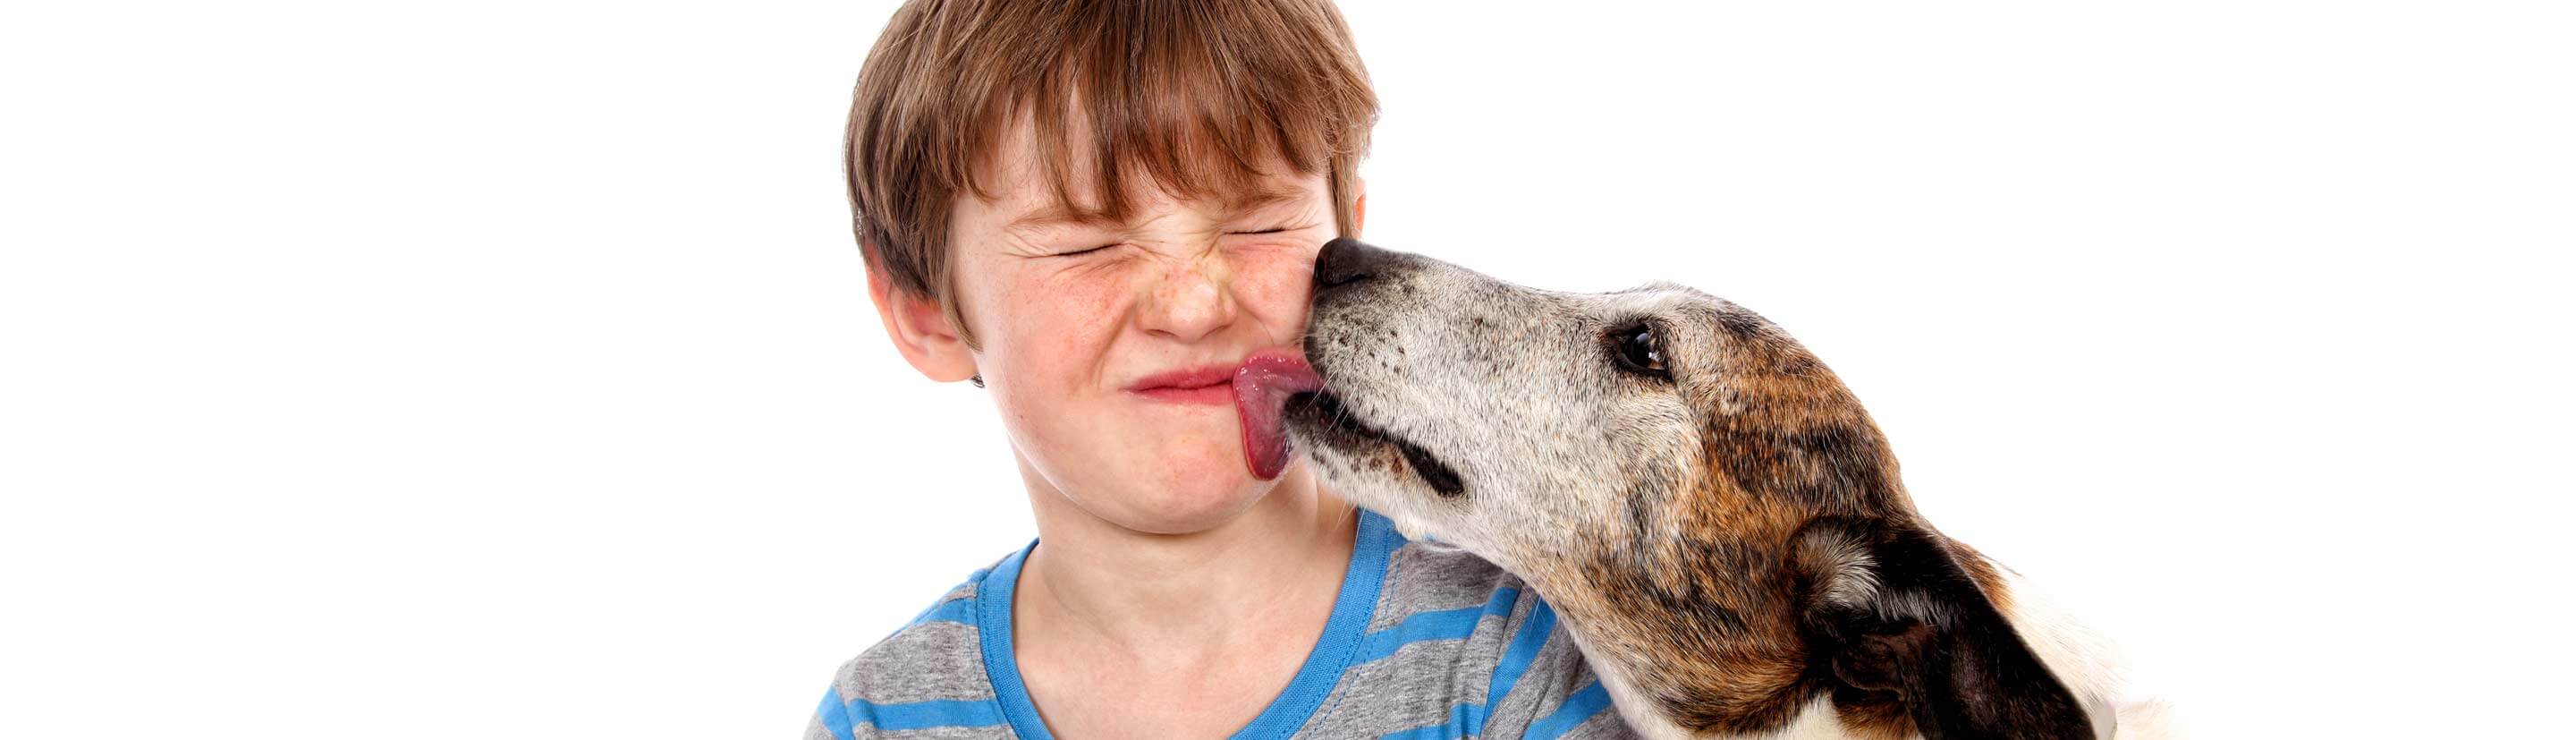 Boy Getting His Face Licked by Dog